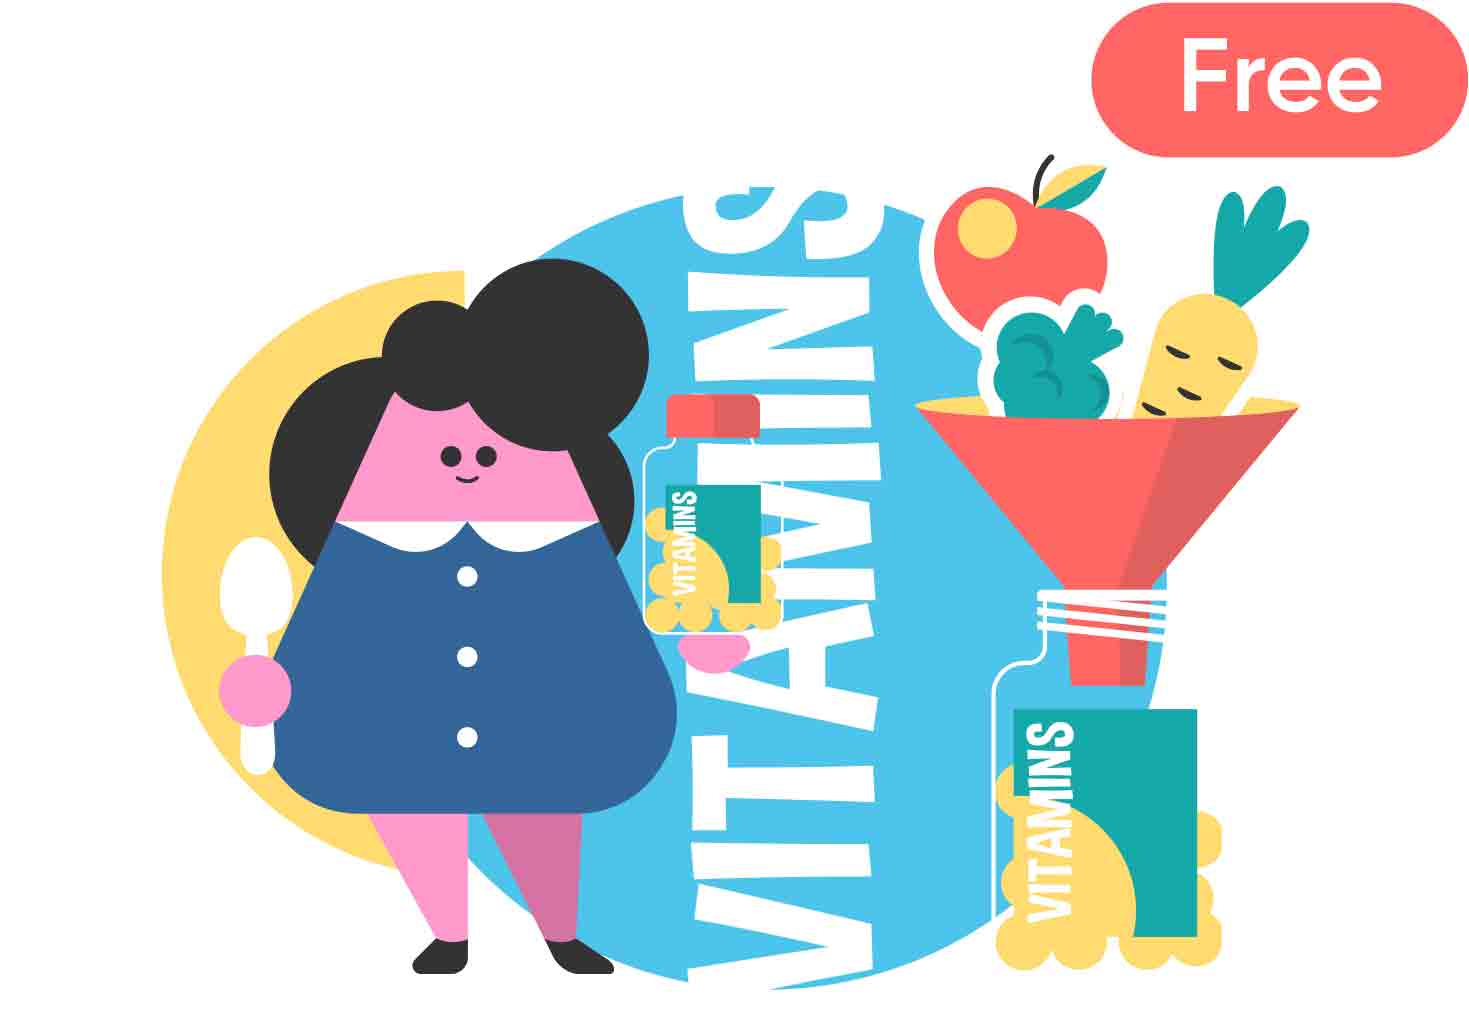 Fun illustration series about yang rapidly growing kids that needs in vitamins and what food and practicies helps kids stay healthy. Vector illustrations